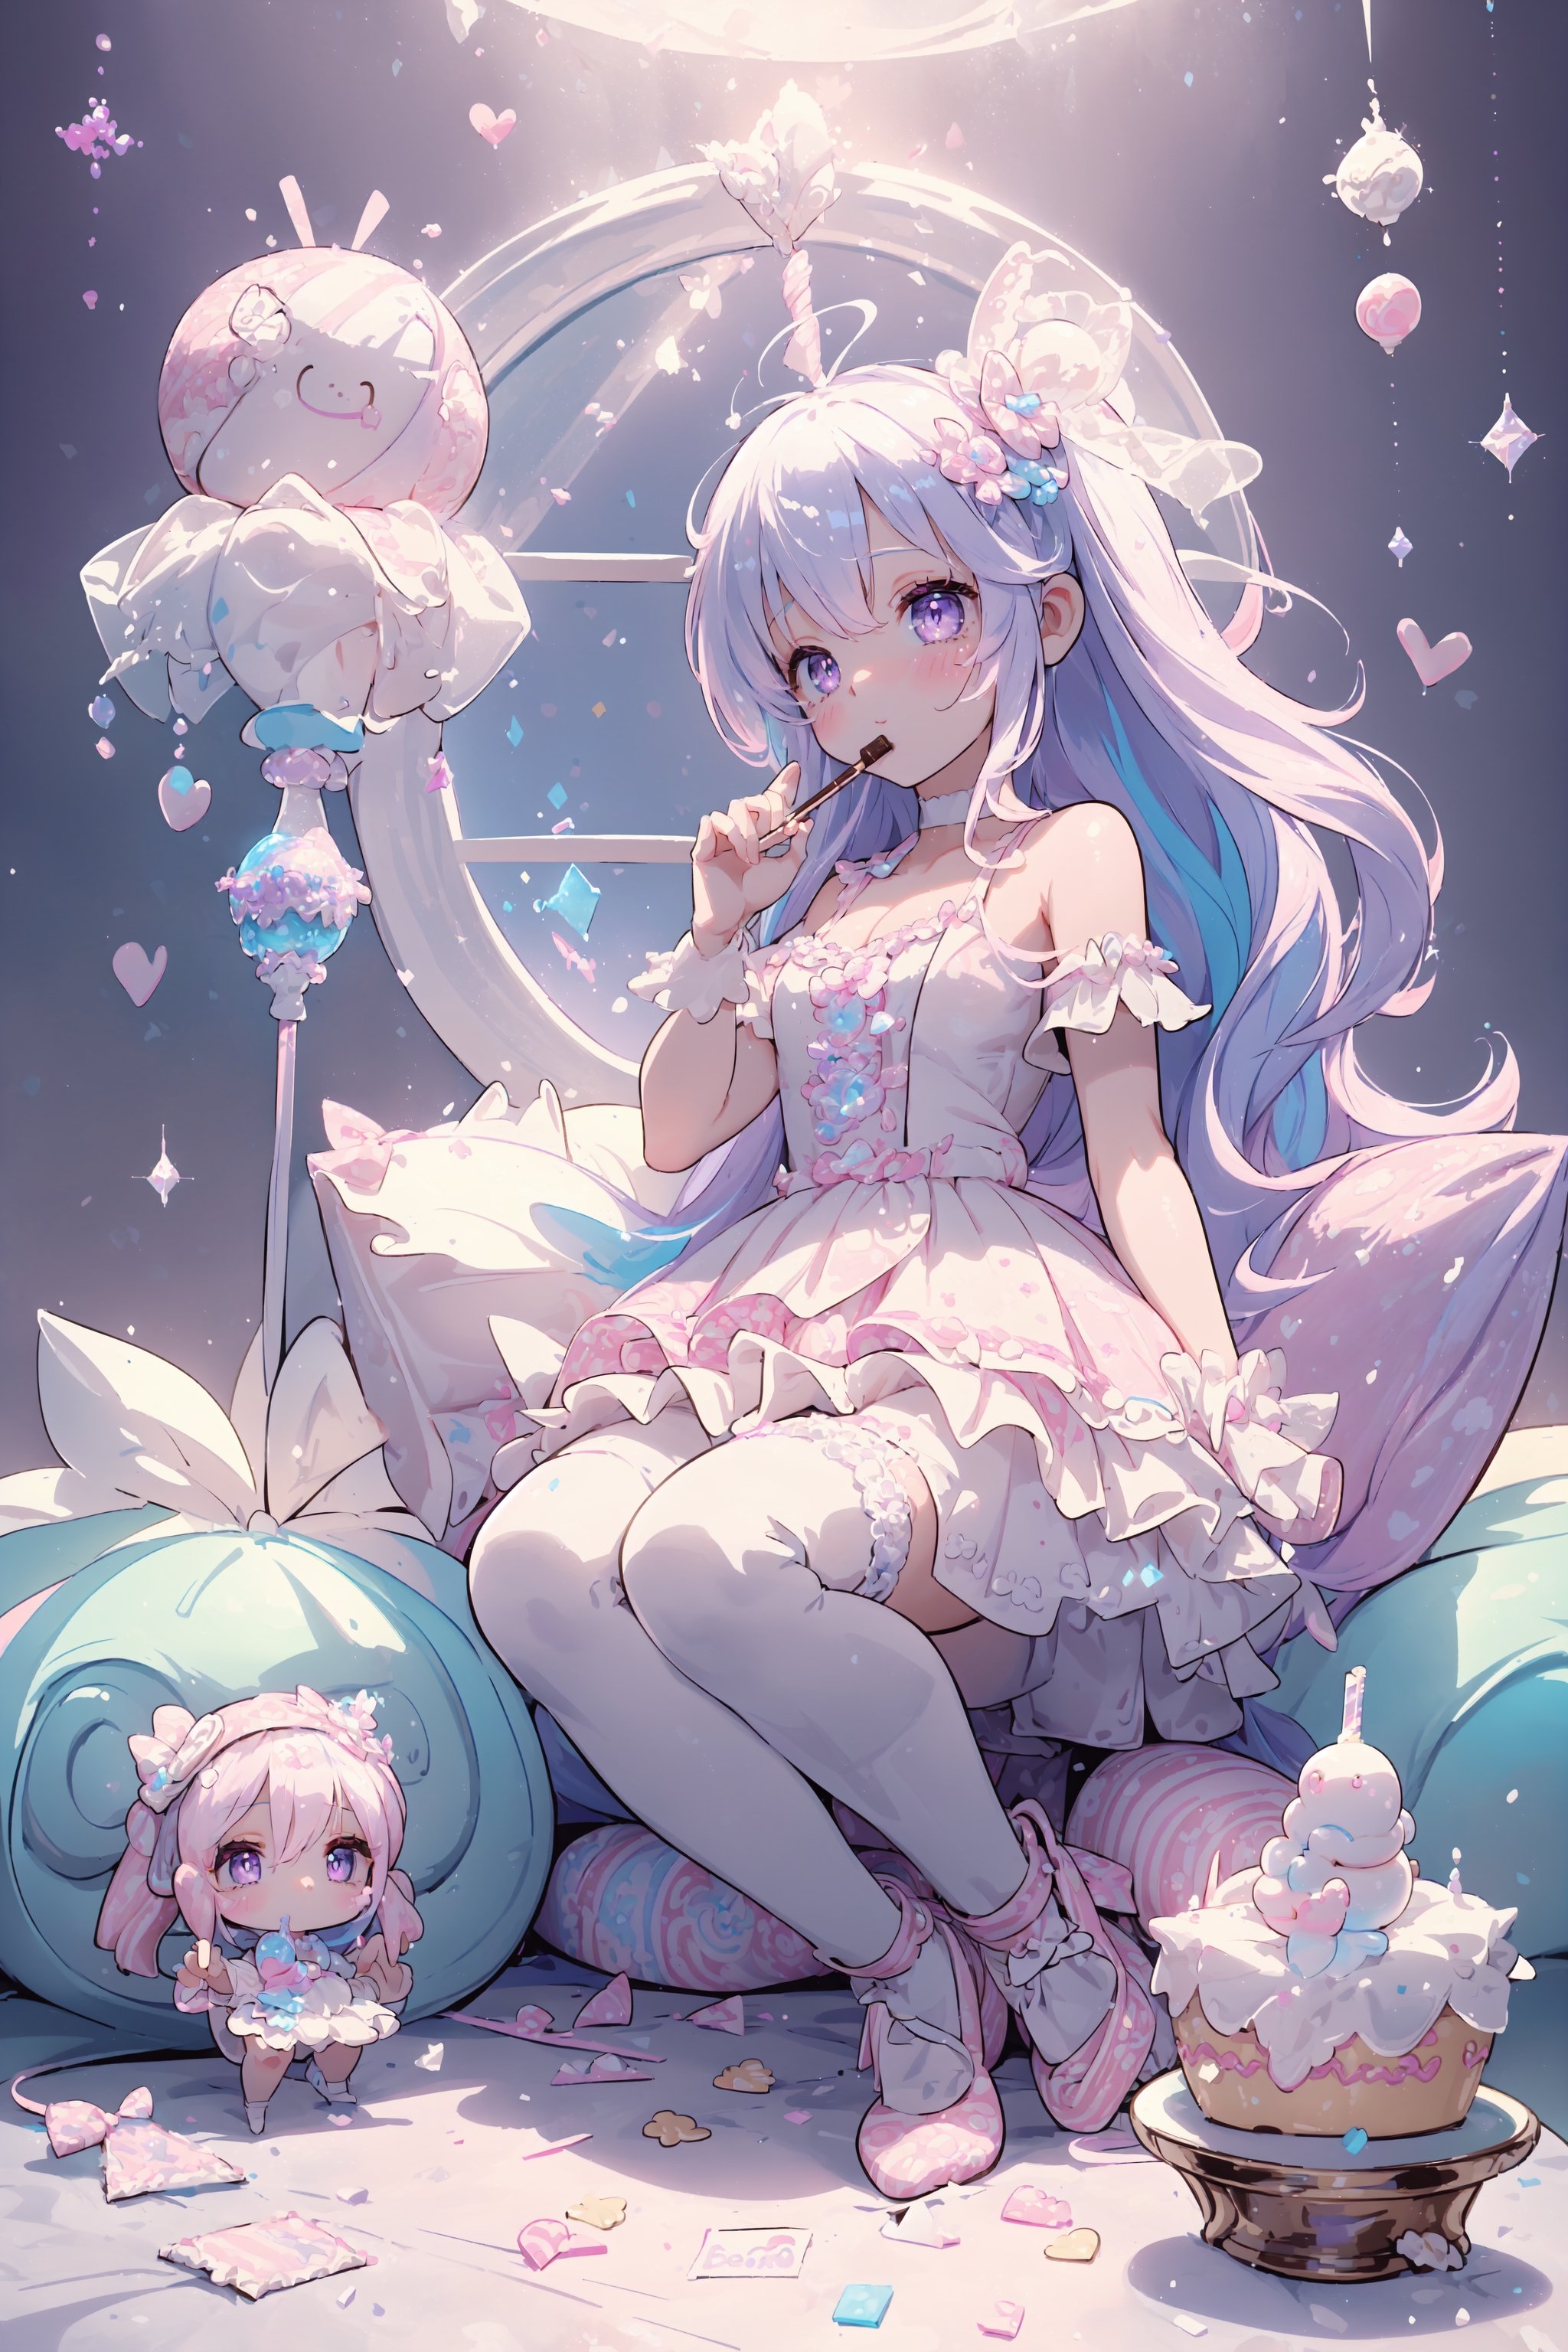 (((1girl, bright white hair, long hair, purple eyes, lolita dress, white dress, short dress, white thigh stockings, small breasts, pale skin, soft skin, rainbow, hearts, heart pillows, pastel, crystals, halo, colorful, pink, purple, blue, doll)) 
((sunlight coming through window)) 
((background, cute home))
((light atmosphere))
((dolls in home))
((4 children, sitting up, fullbody))
(fluffy, soft, light, bright, sparkles, twinkle, cute, pink, purple, blue, clouds, pastel, light colors, glitter, happy, normal pupil)
best quality, masterpiece, Detailedface, high_res 8K, candyland, candy, sweets, lollipop, chocolate, ice cream, swirl lollipop, strawberry, ice cream, doughnut, cake, cupcake, balloon, chocolate bar, bubble, pocky, crean, whipped cream, dessert, pastry, candy wrapper, icing, teacup, confetti,candyland,full background